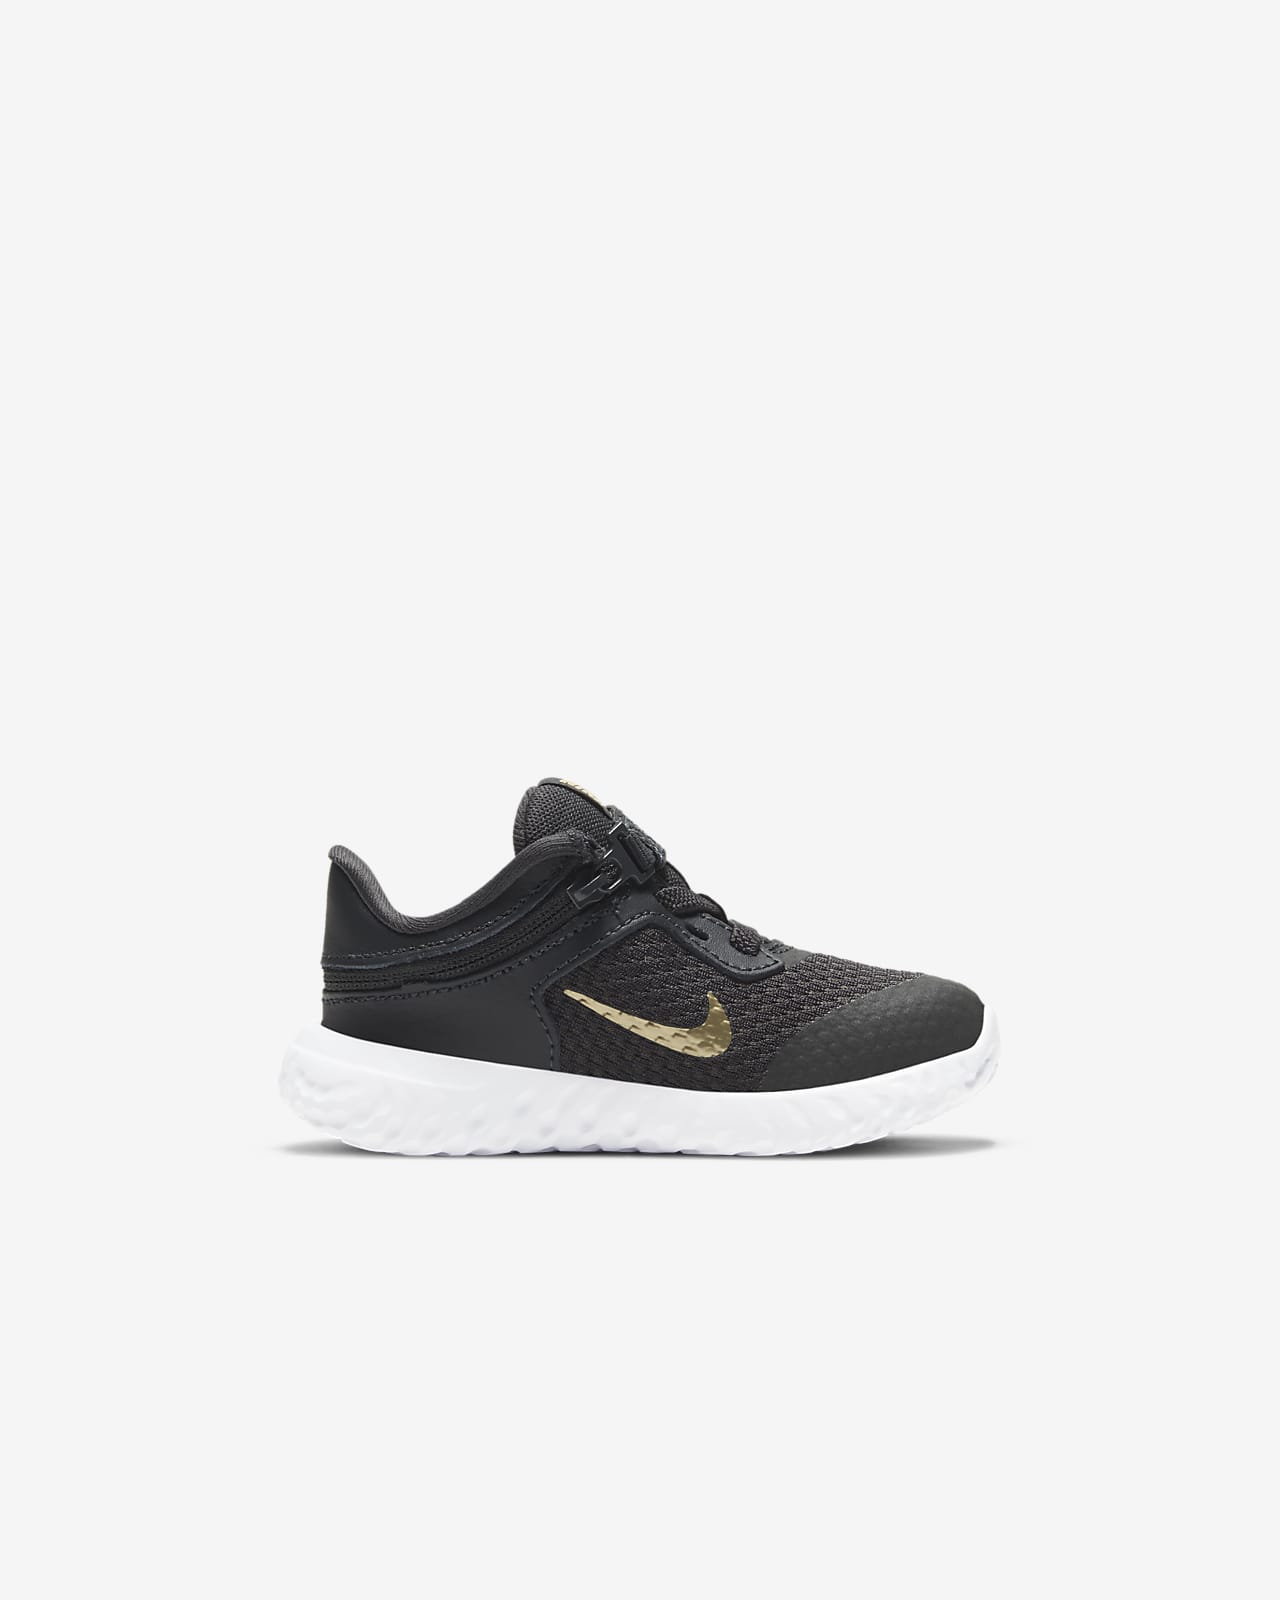 nike afo shoes for toddlers